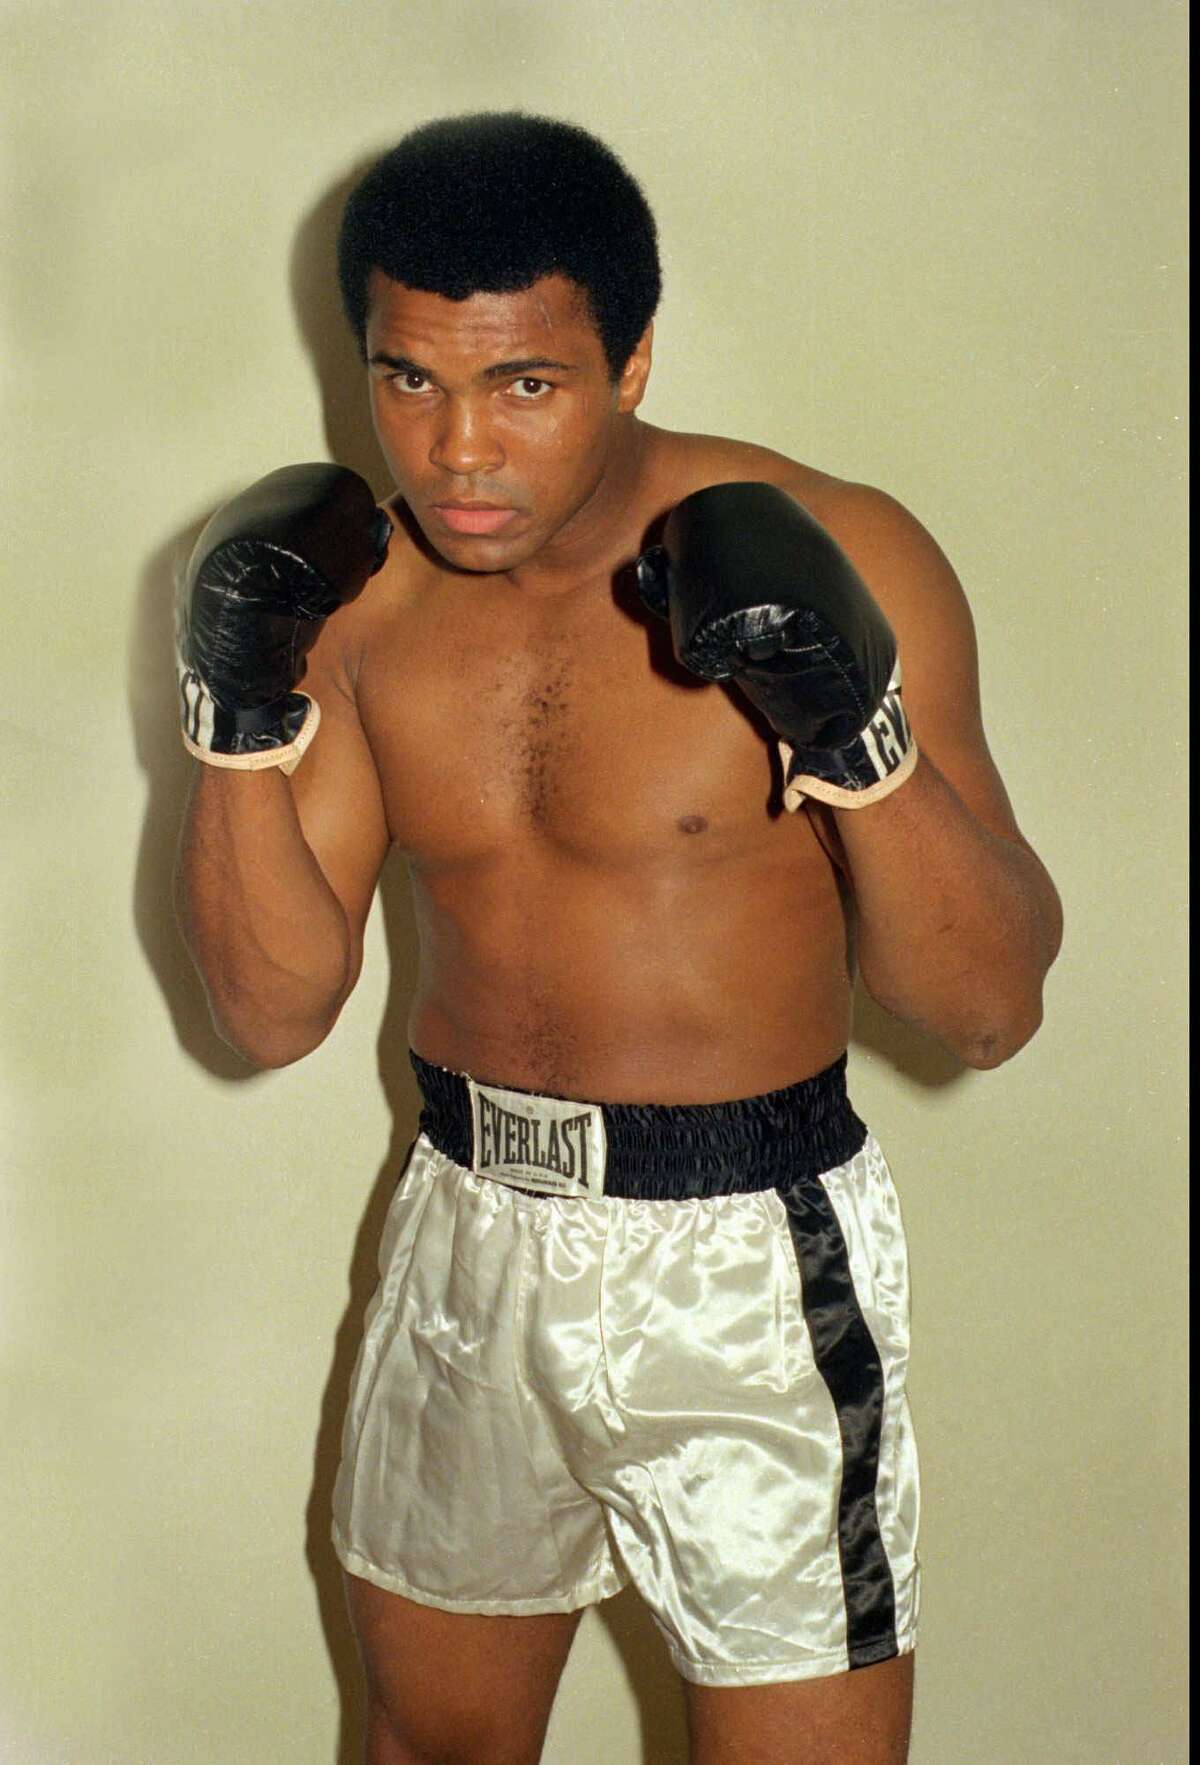 Muhammad Ali is shown in this October 9, 1974 file photo. (AP Photo / archive)